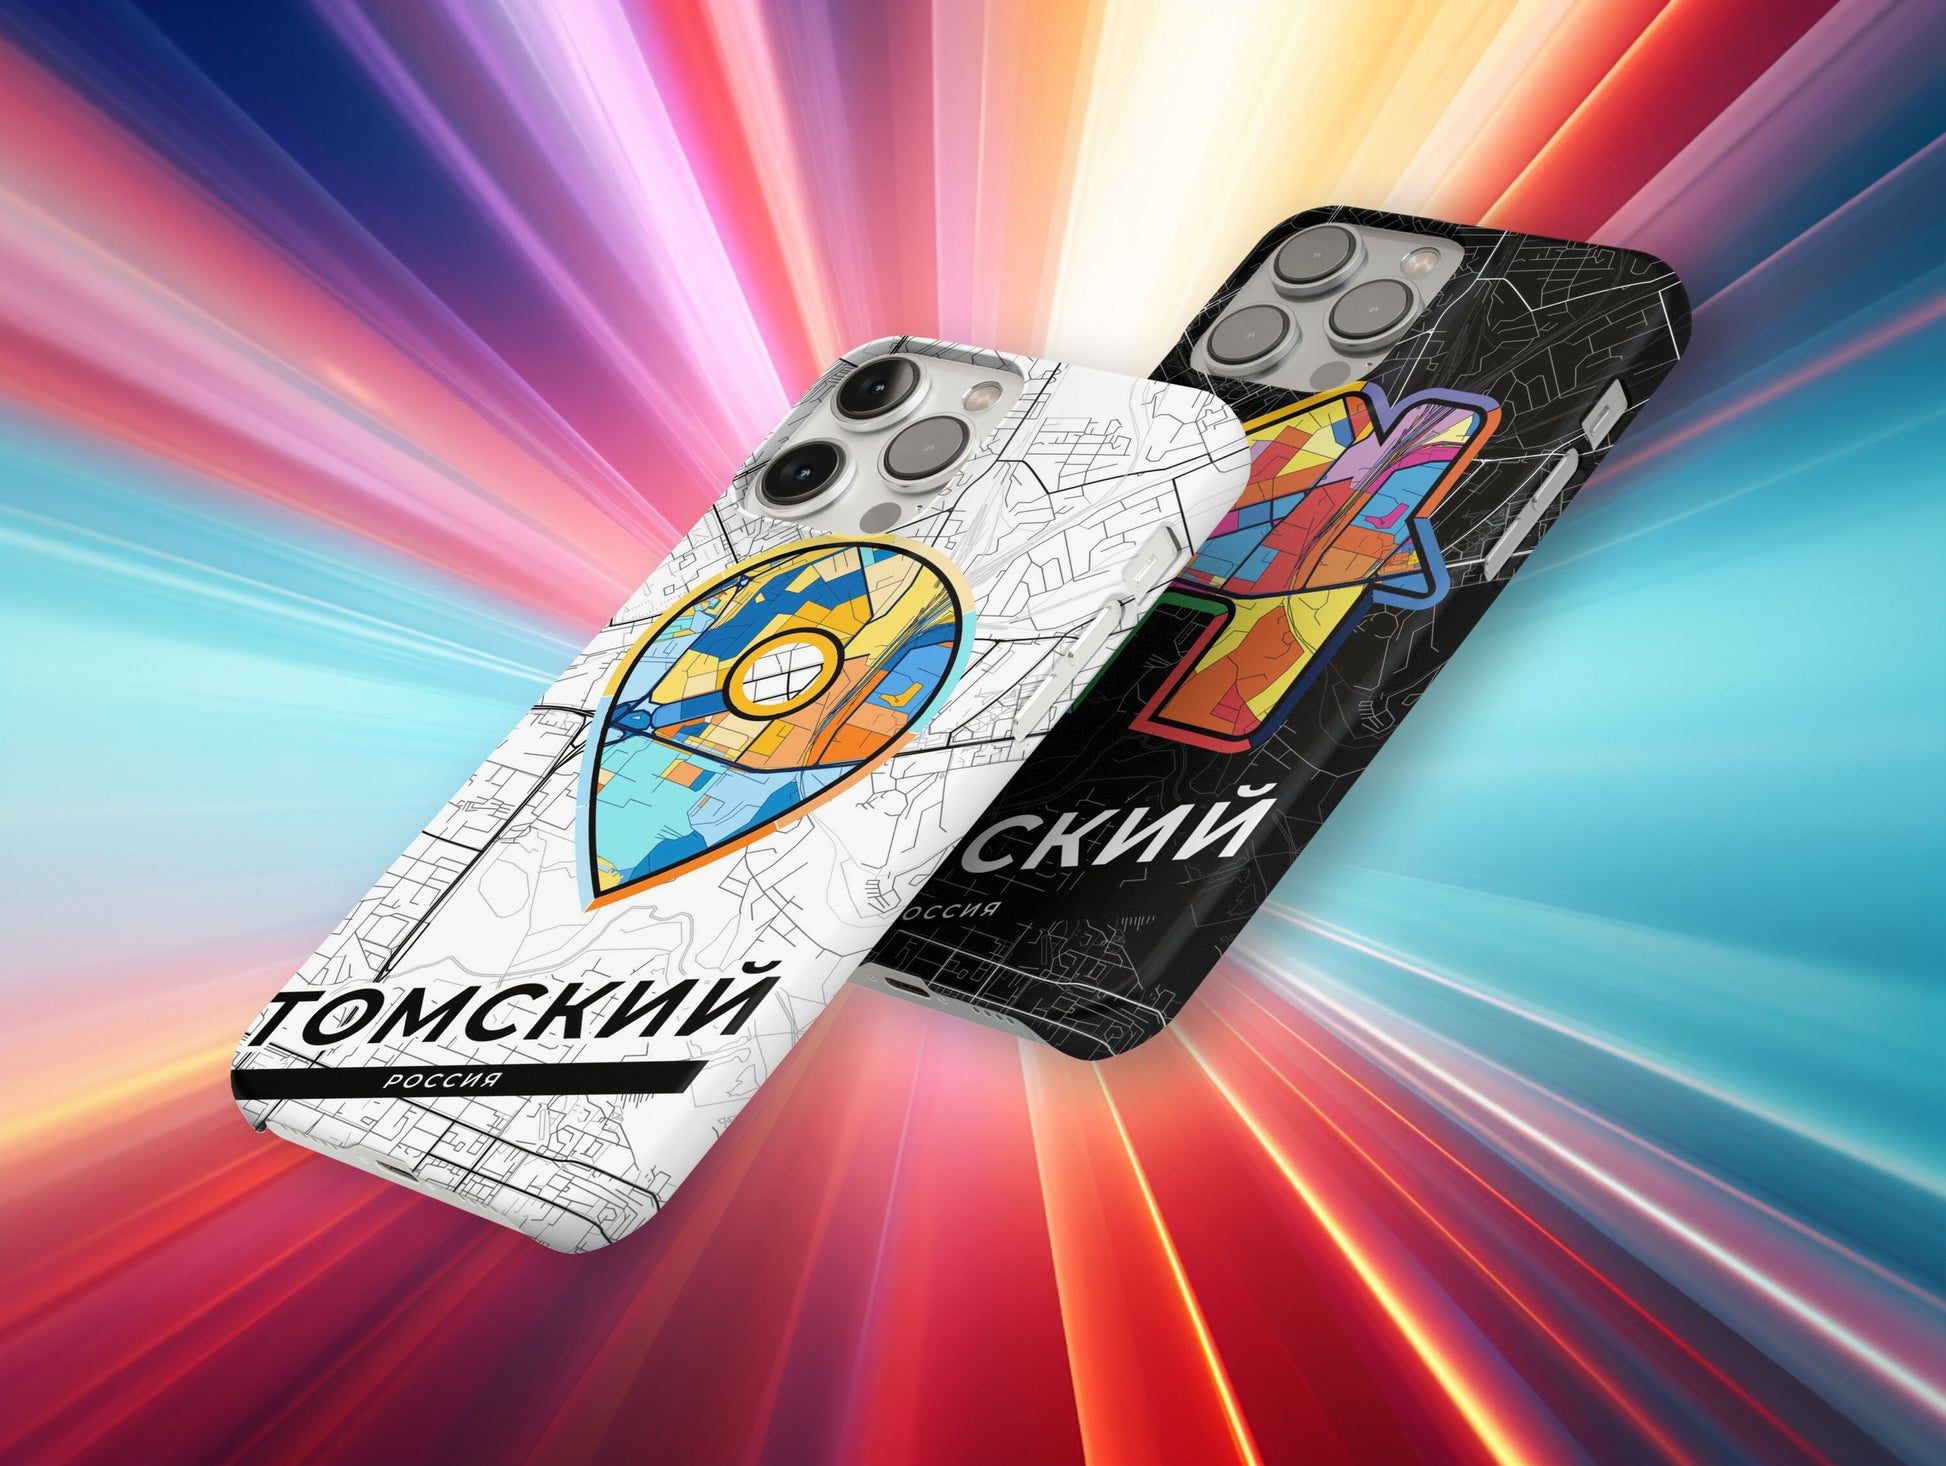 Tomsk Russia slim phone case with colorful icon